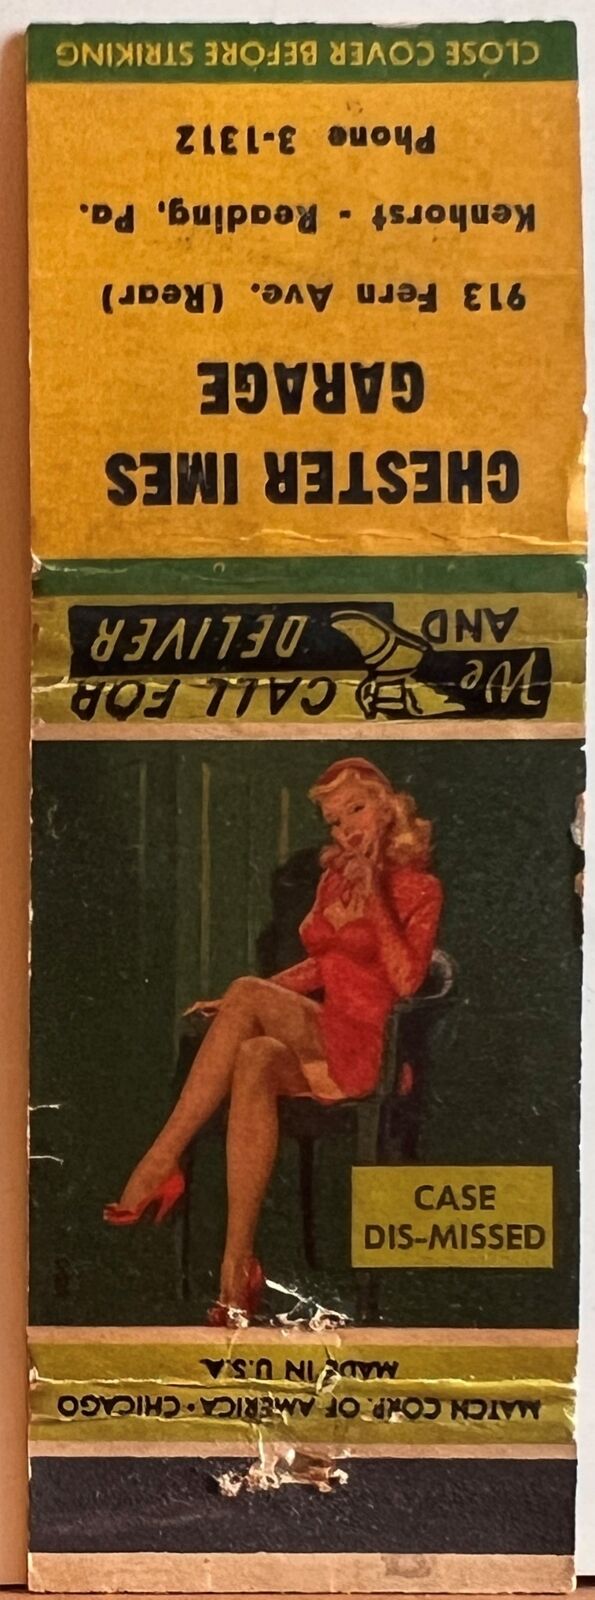 Chester Imes Garage Reading PA Pennsylvania Girlie Pin-Up Matchbook Cover